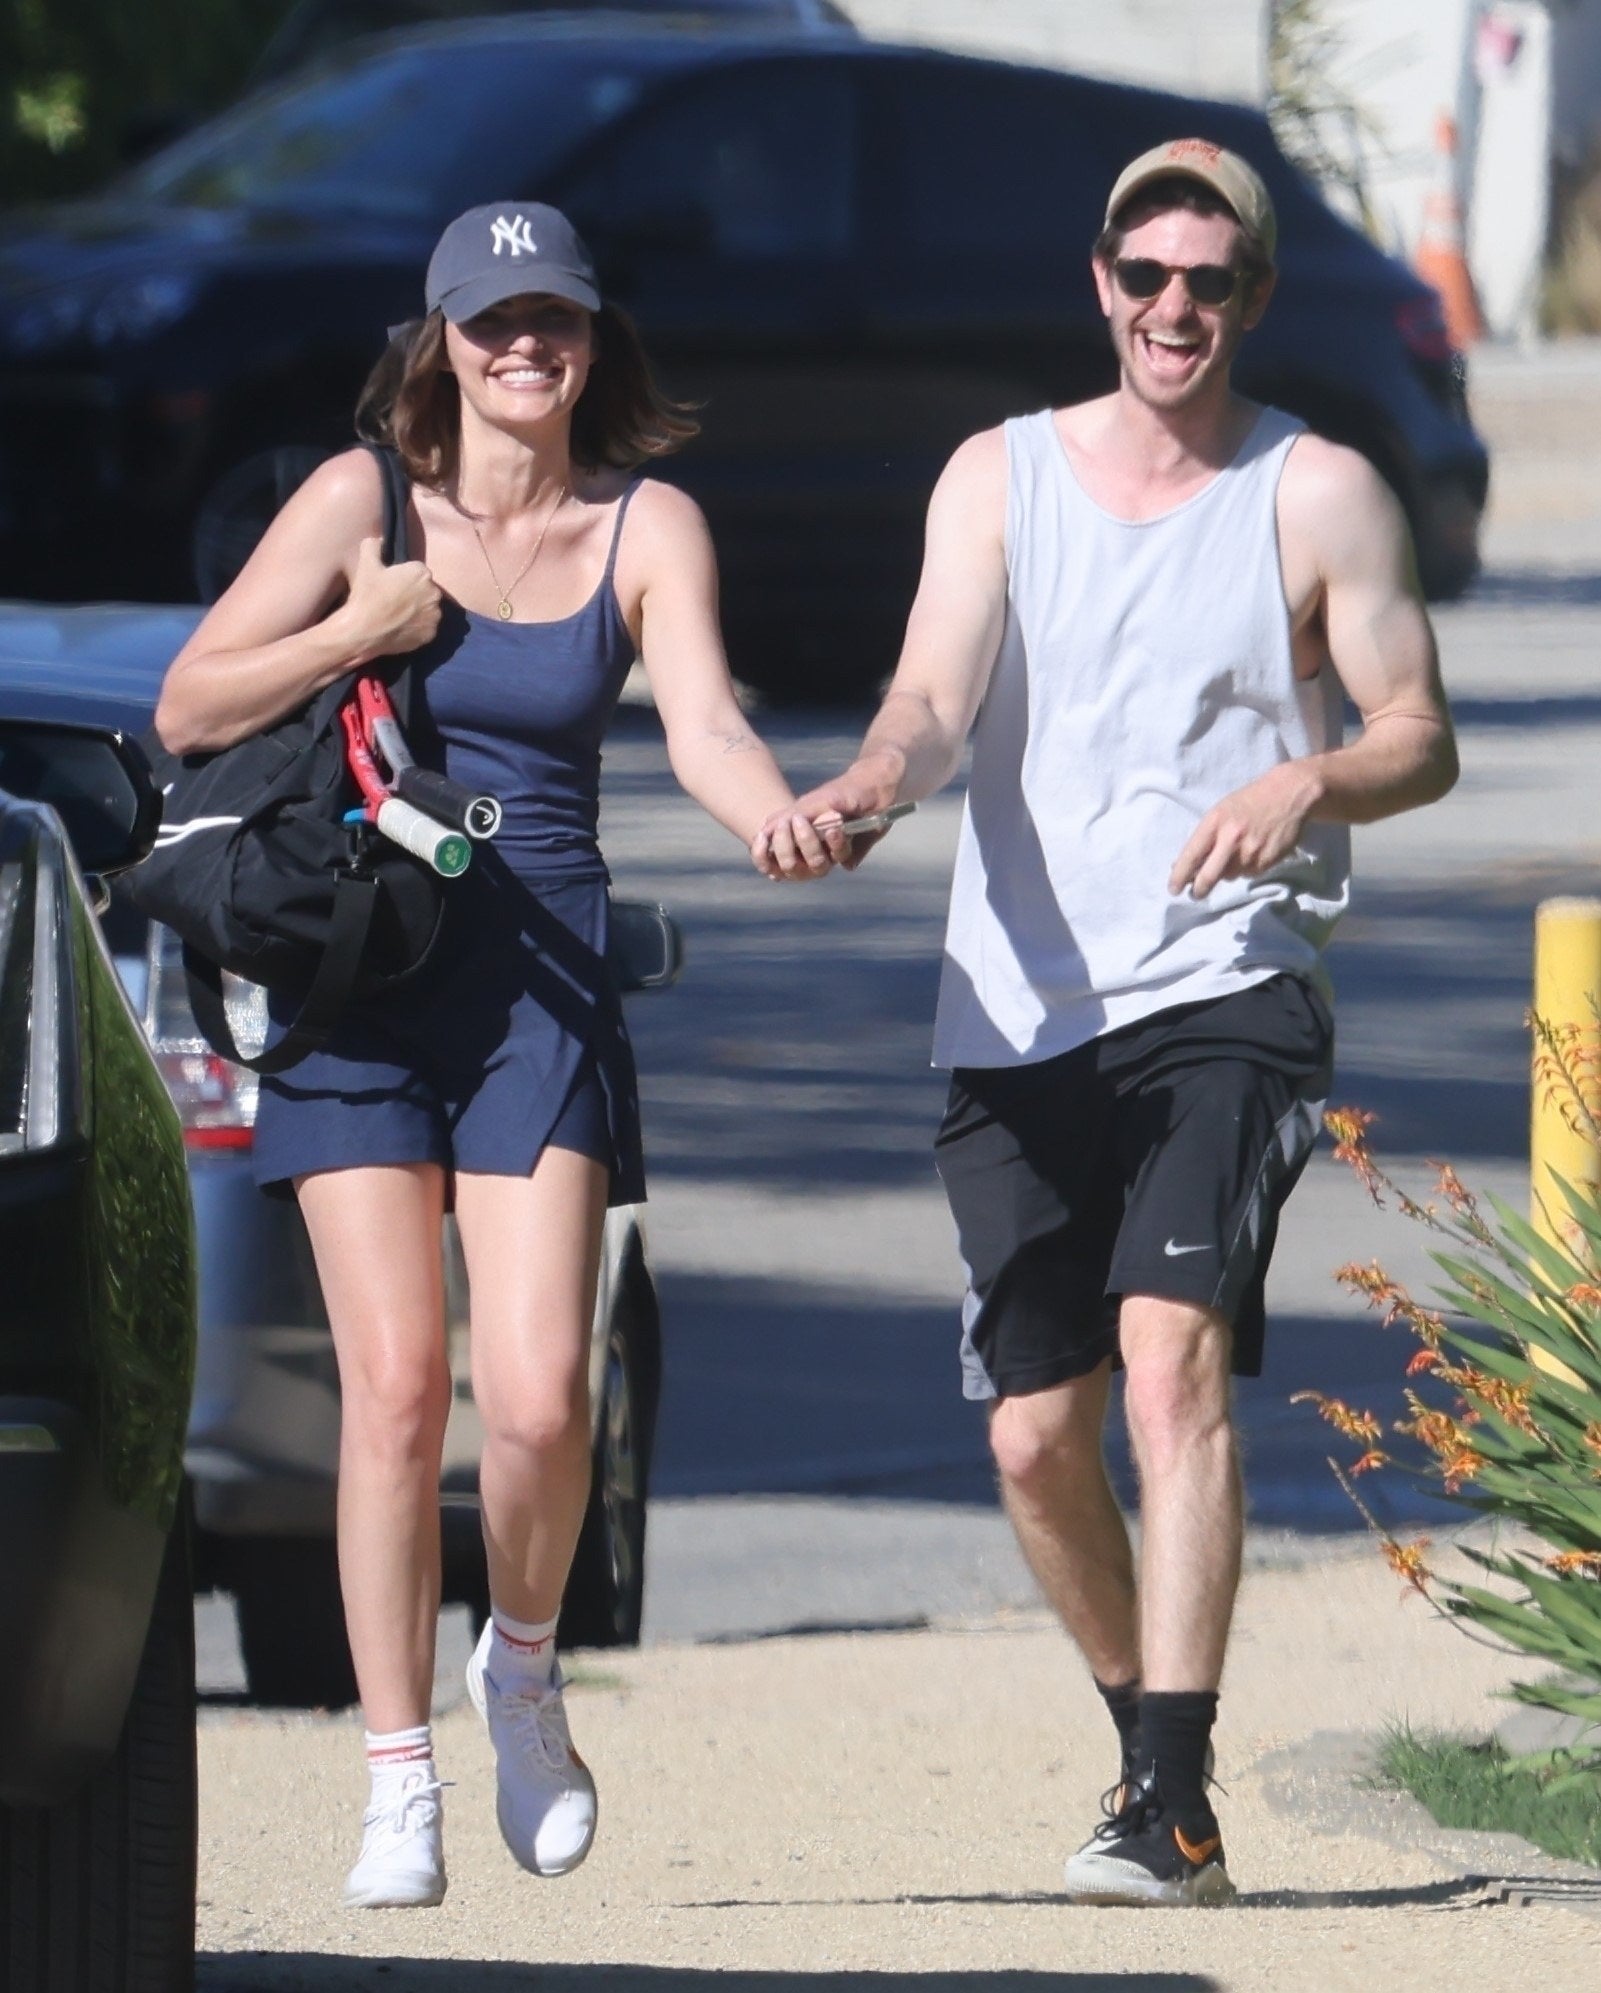 wearing workout clothes, they hold hands and laugh while jogging down the street